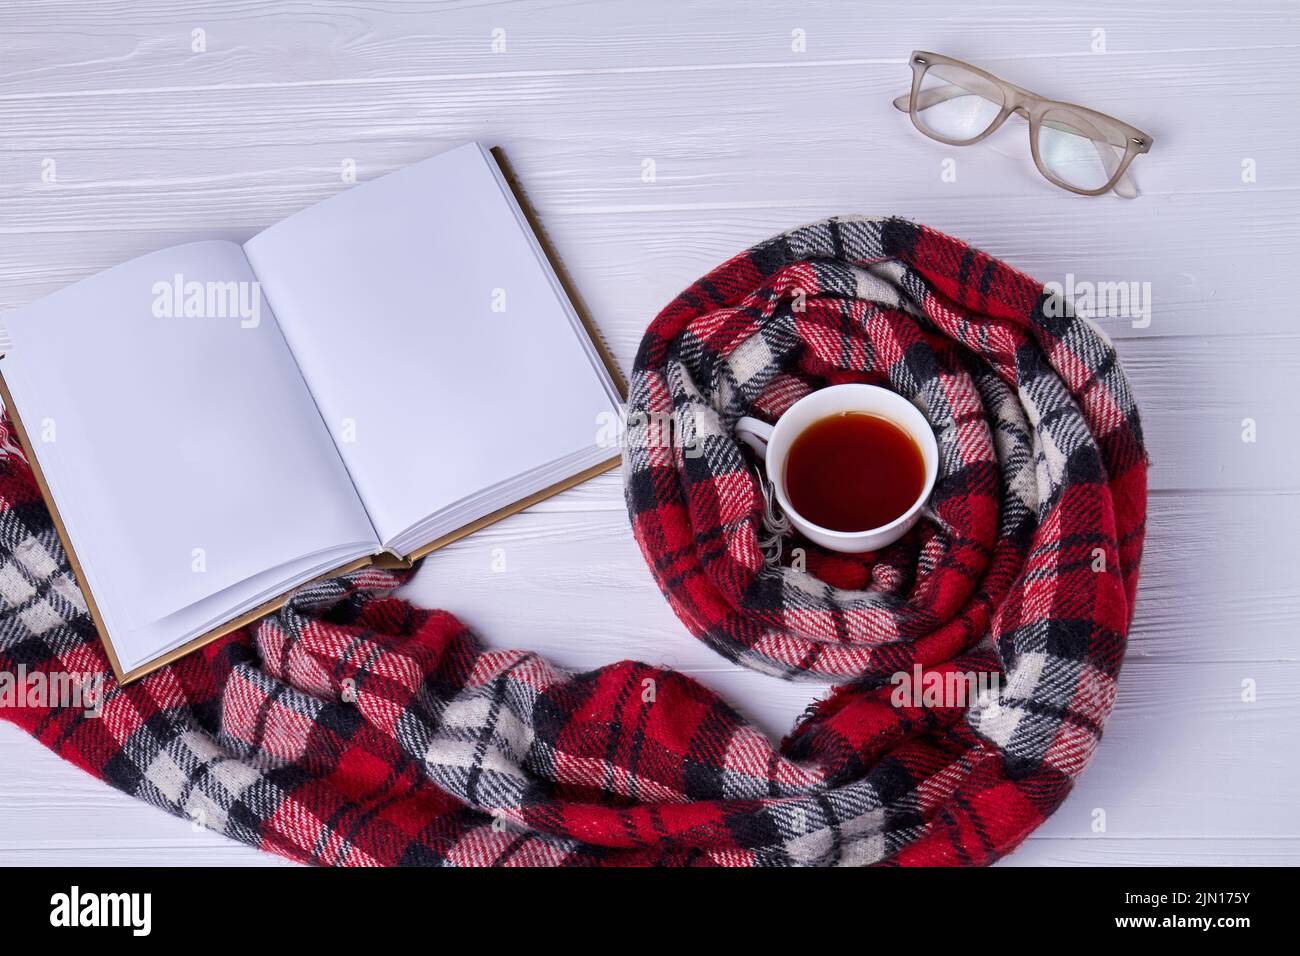 Top view cup of tea with scarf. Blank notebook with glasses. Stock Photo